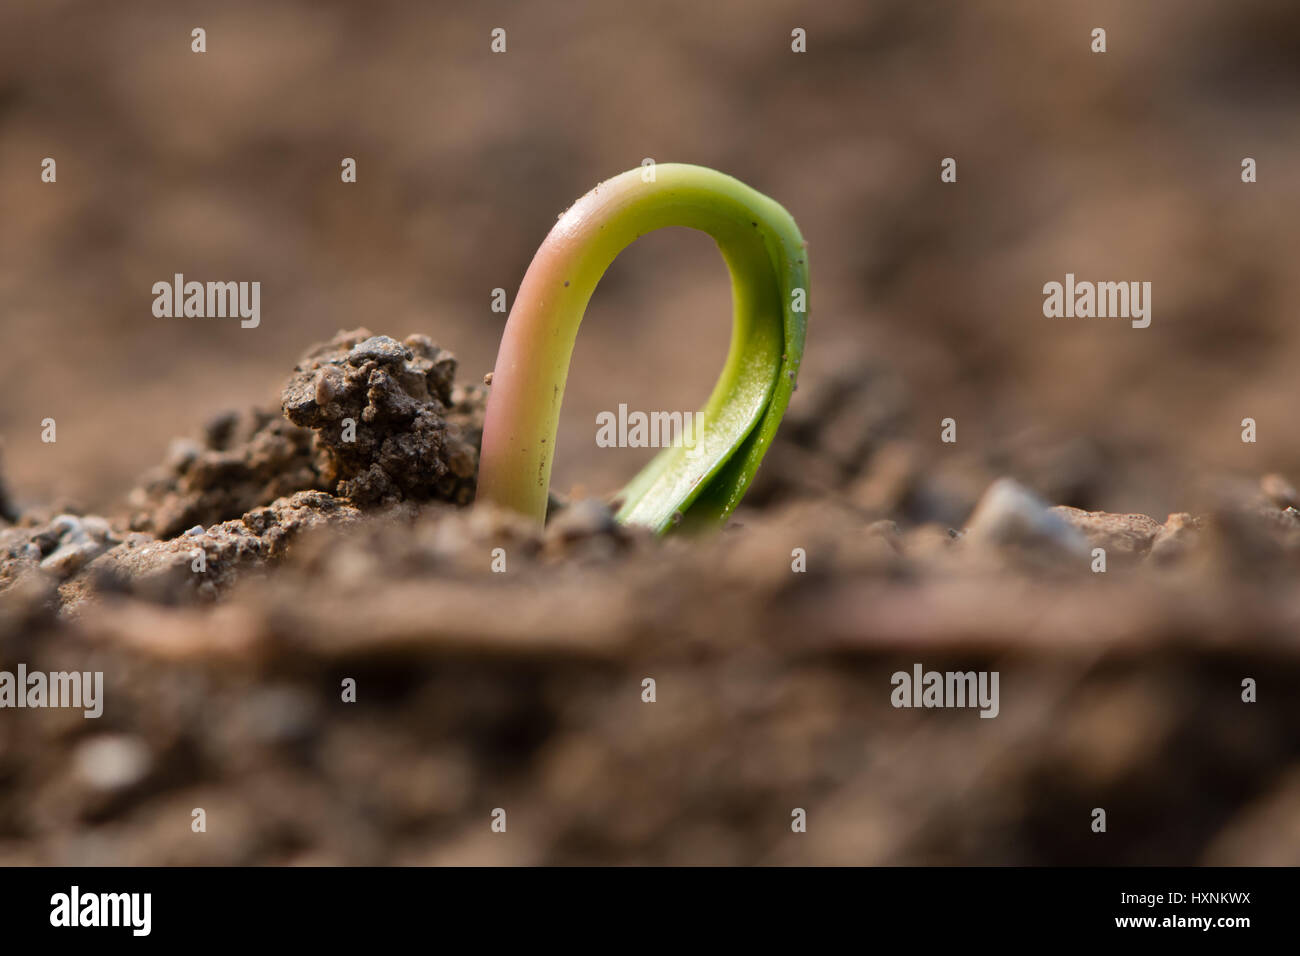 Sycamore (Acer pseudoplatanus) seedling emerging from earth. Germinating eudicot plant with embryonic leaves still partially buried in soil Stock Photo